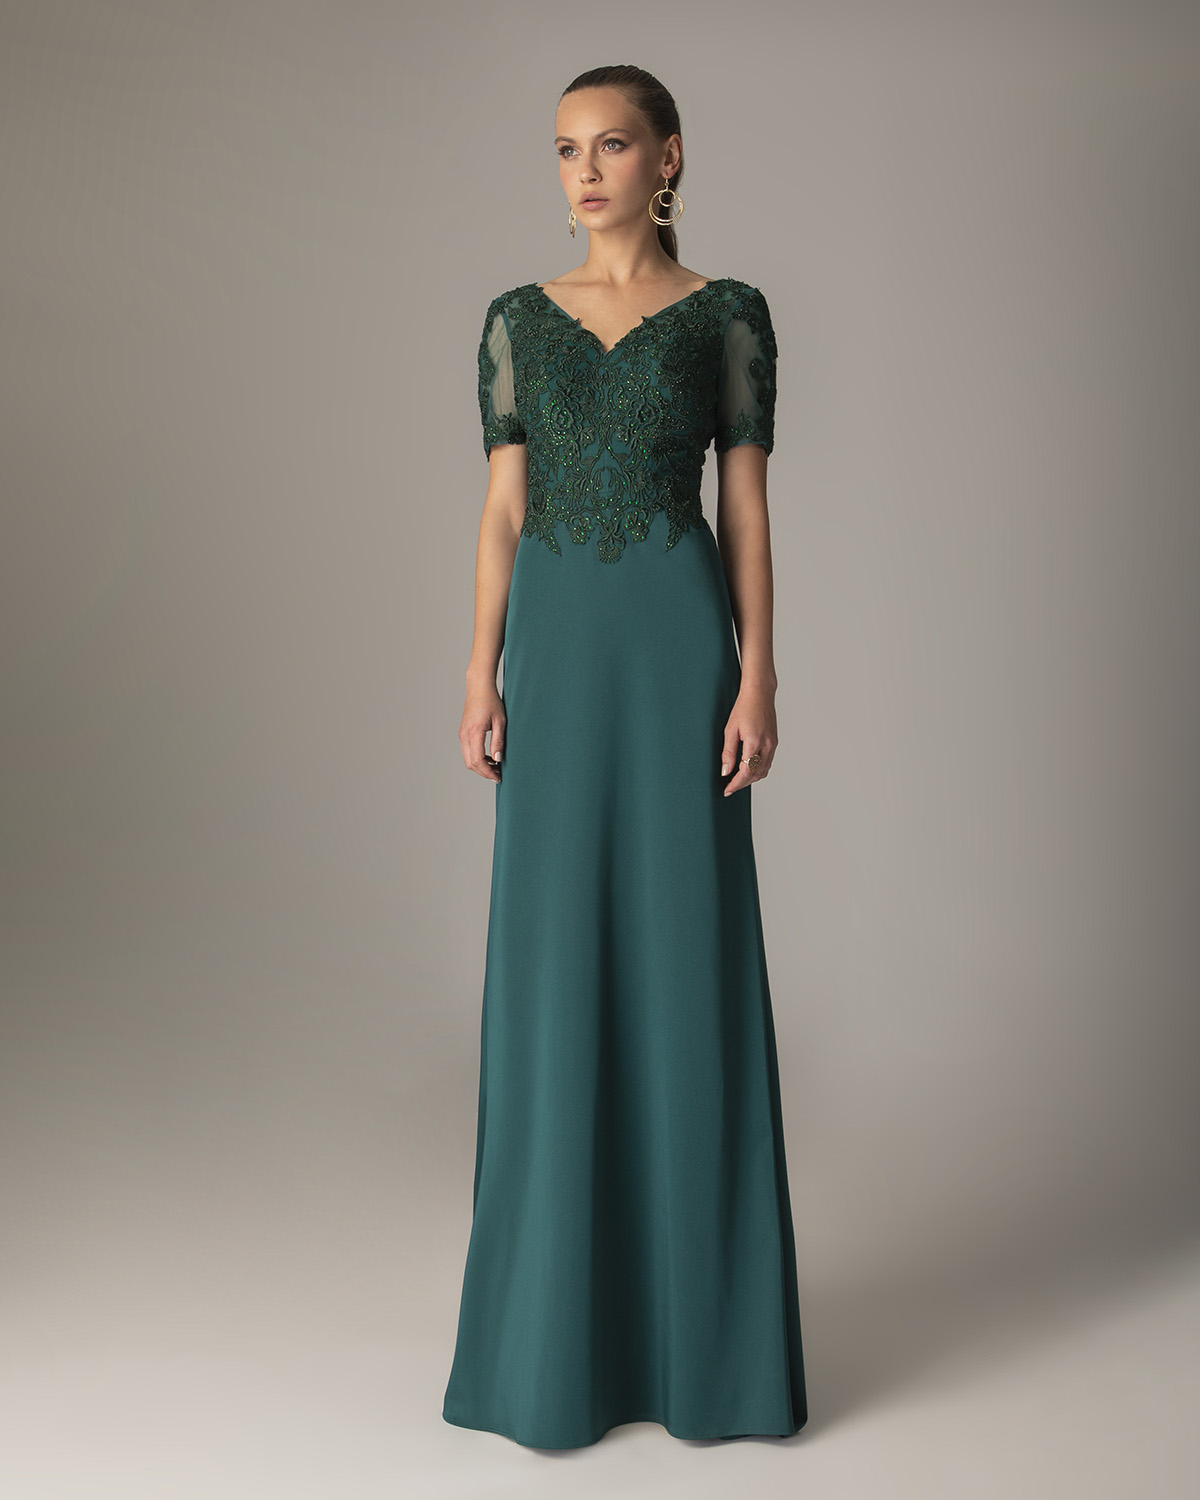 Classic Dresses / Long satin dress with short sleeves and applique beaded lace on the top